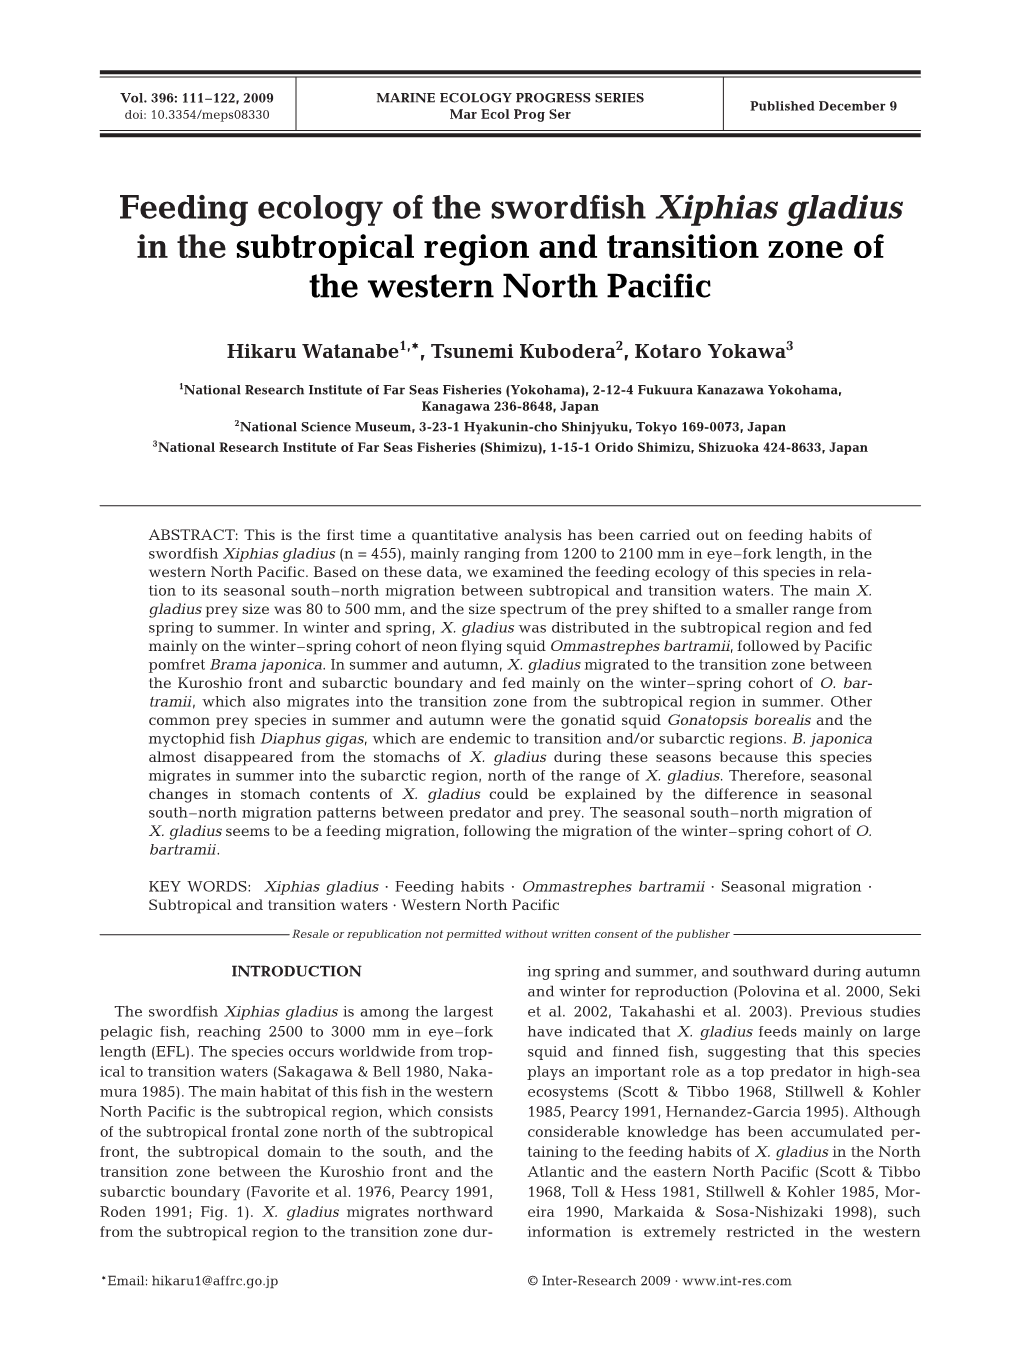 Feeding Ecology of the Swordfish Xiphias Gladius in the Subtropical Region and Transition Zone of the Western North Pacific